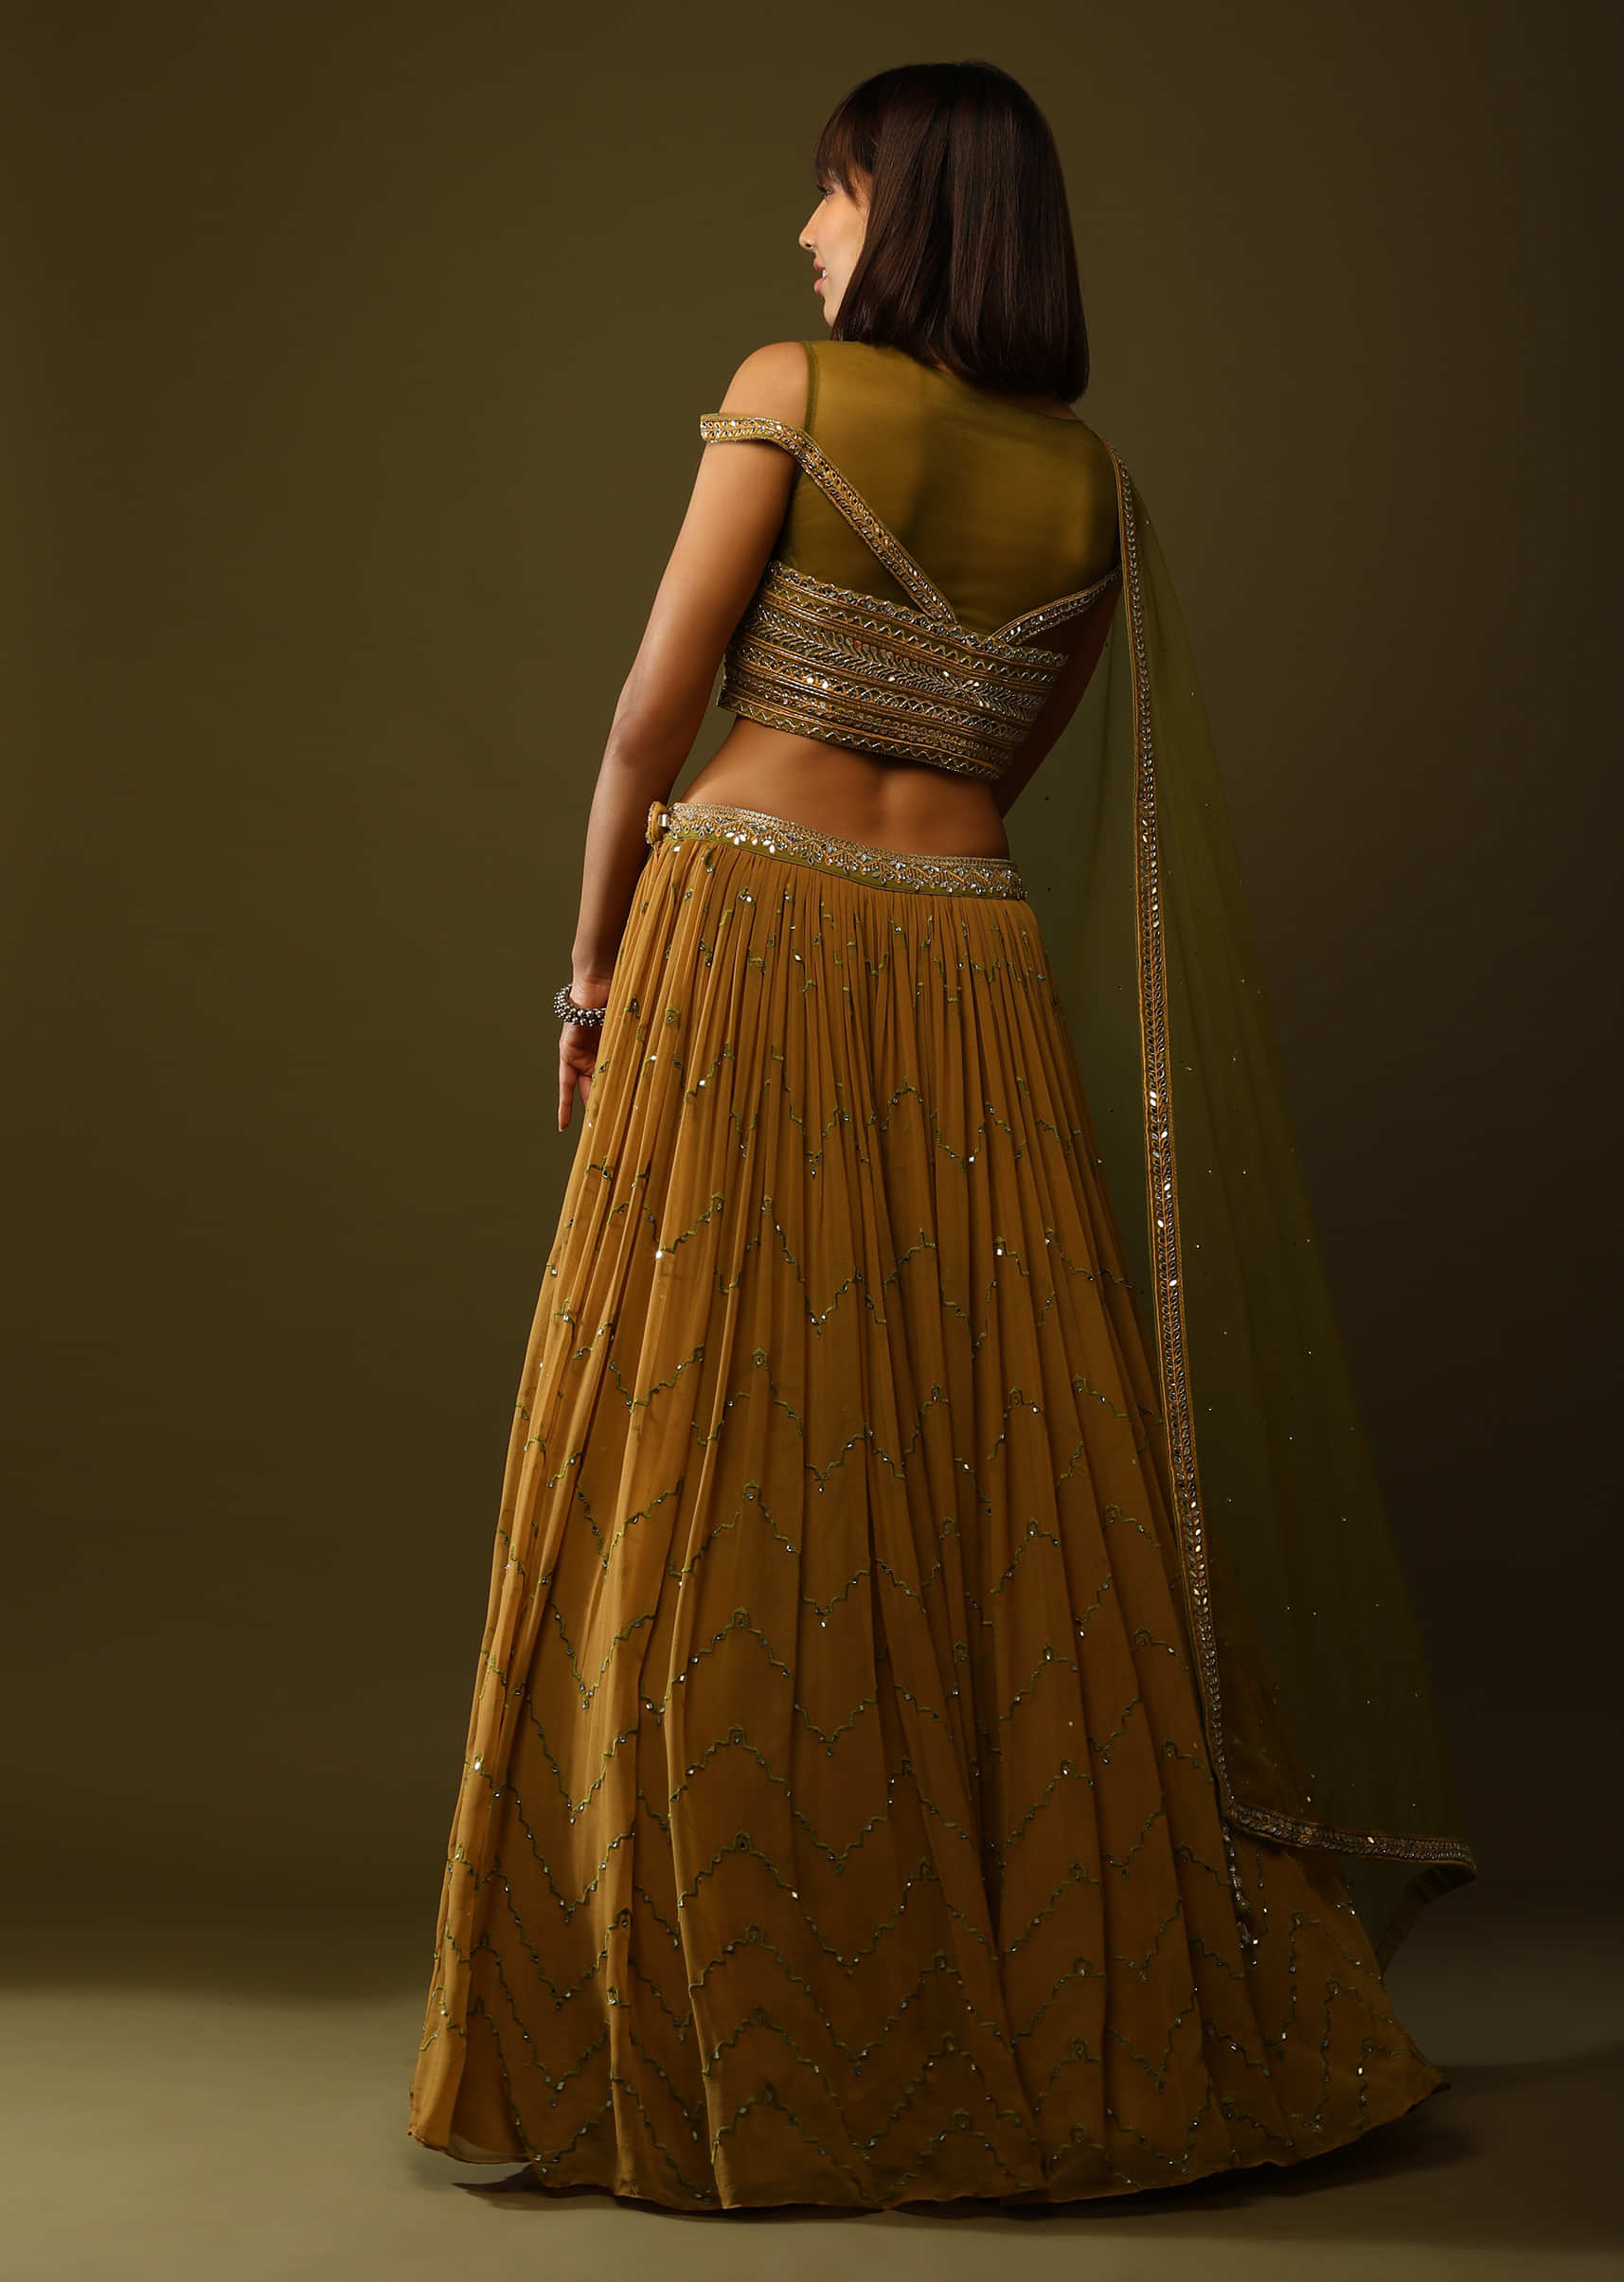 Ochre Yellow Lehenga Choli With Resham And Mirror Work And Cold Shoulder Sleeves Online - Kalki Fashion